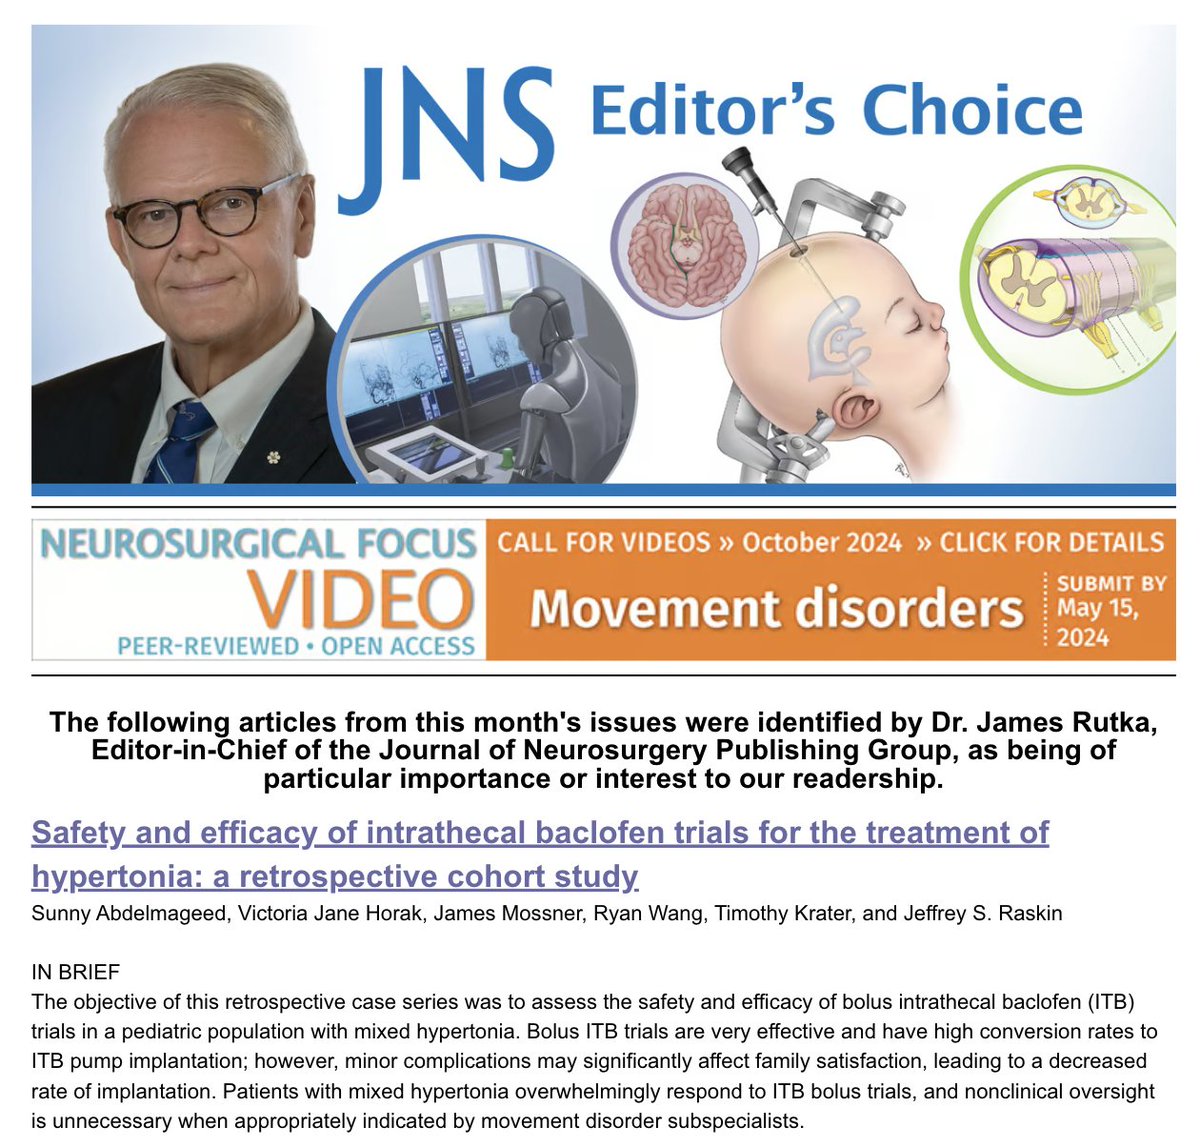 Congrats! Another Editor's Choice selection for @LurieNeurosurg @NeurosurgeryNM team. Jeffrey Raskin @jamemoss @SunnyAbdelmagee @JaneHorak report on IT baclofen trials for hypertonia. Thanks @JNSPG_EIC! Implication: can we provide more efficient care for families? Answer: Yes!